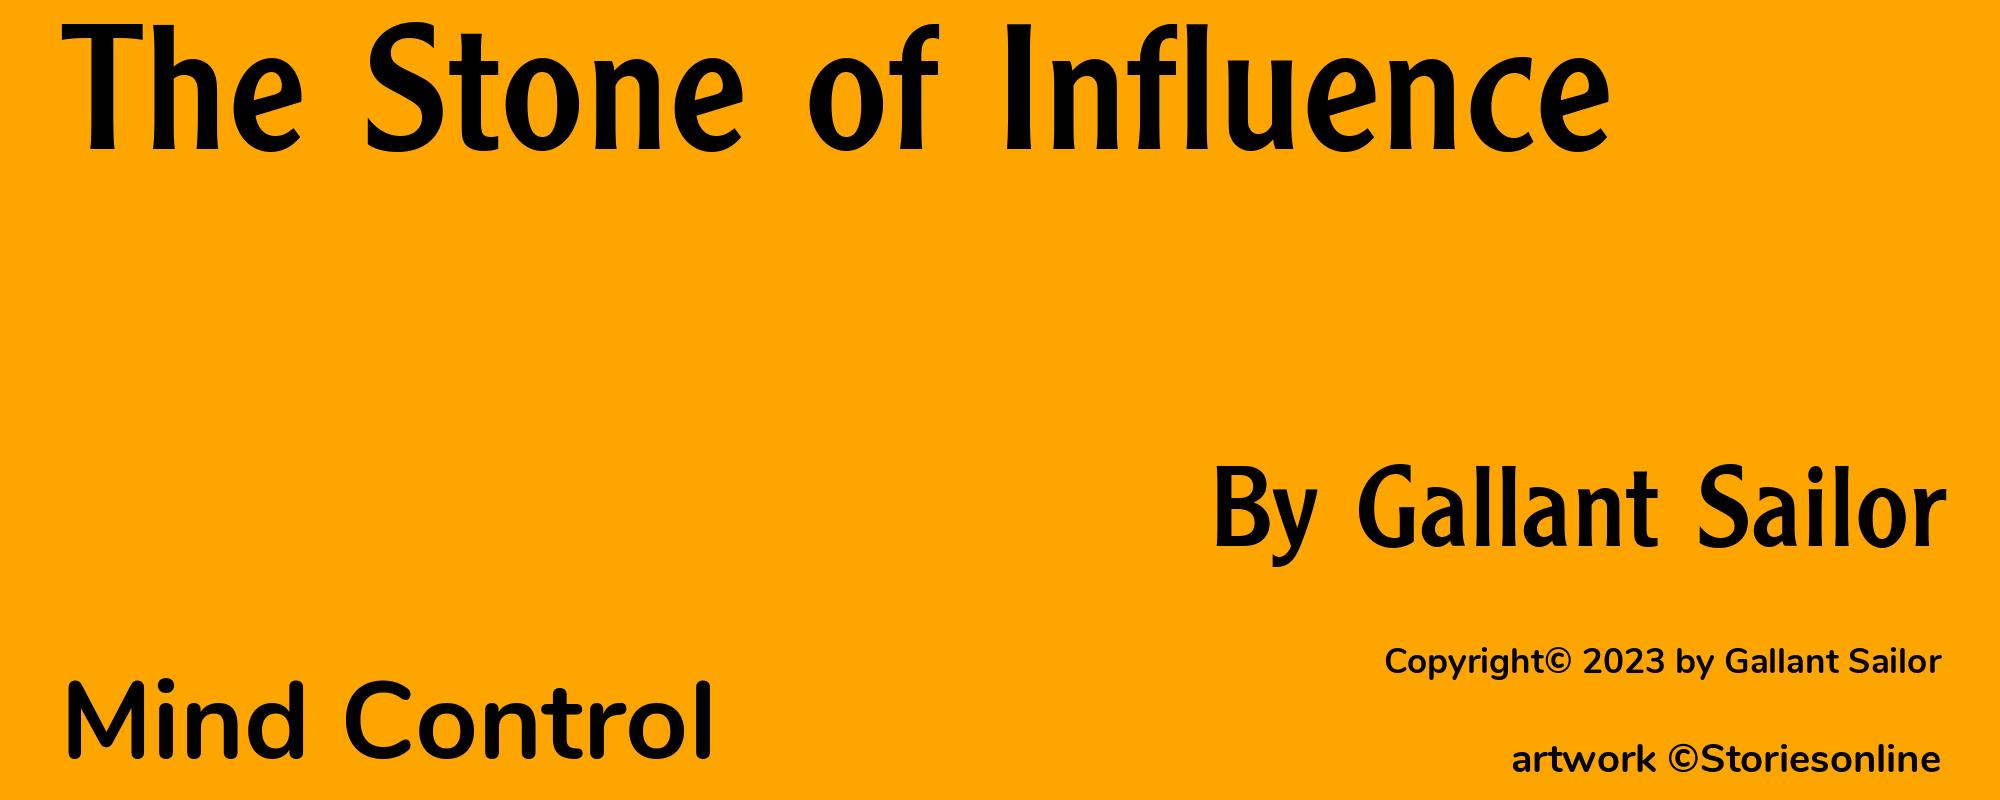 The Stone of Influence - Cover